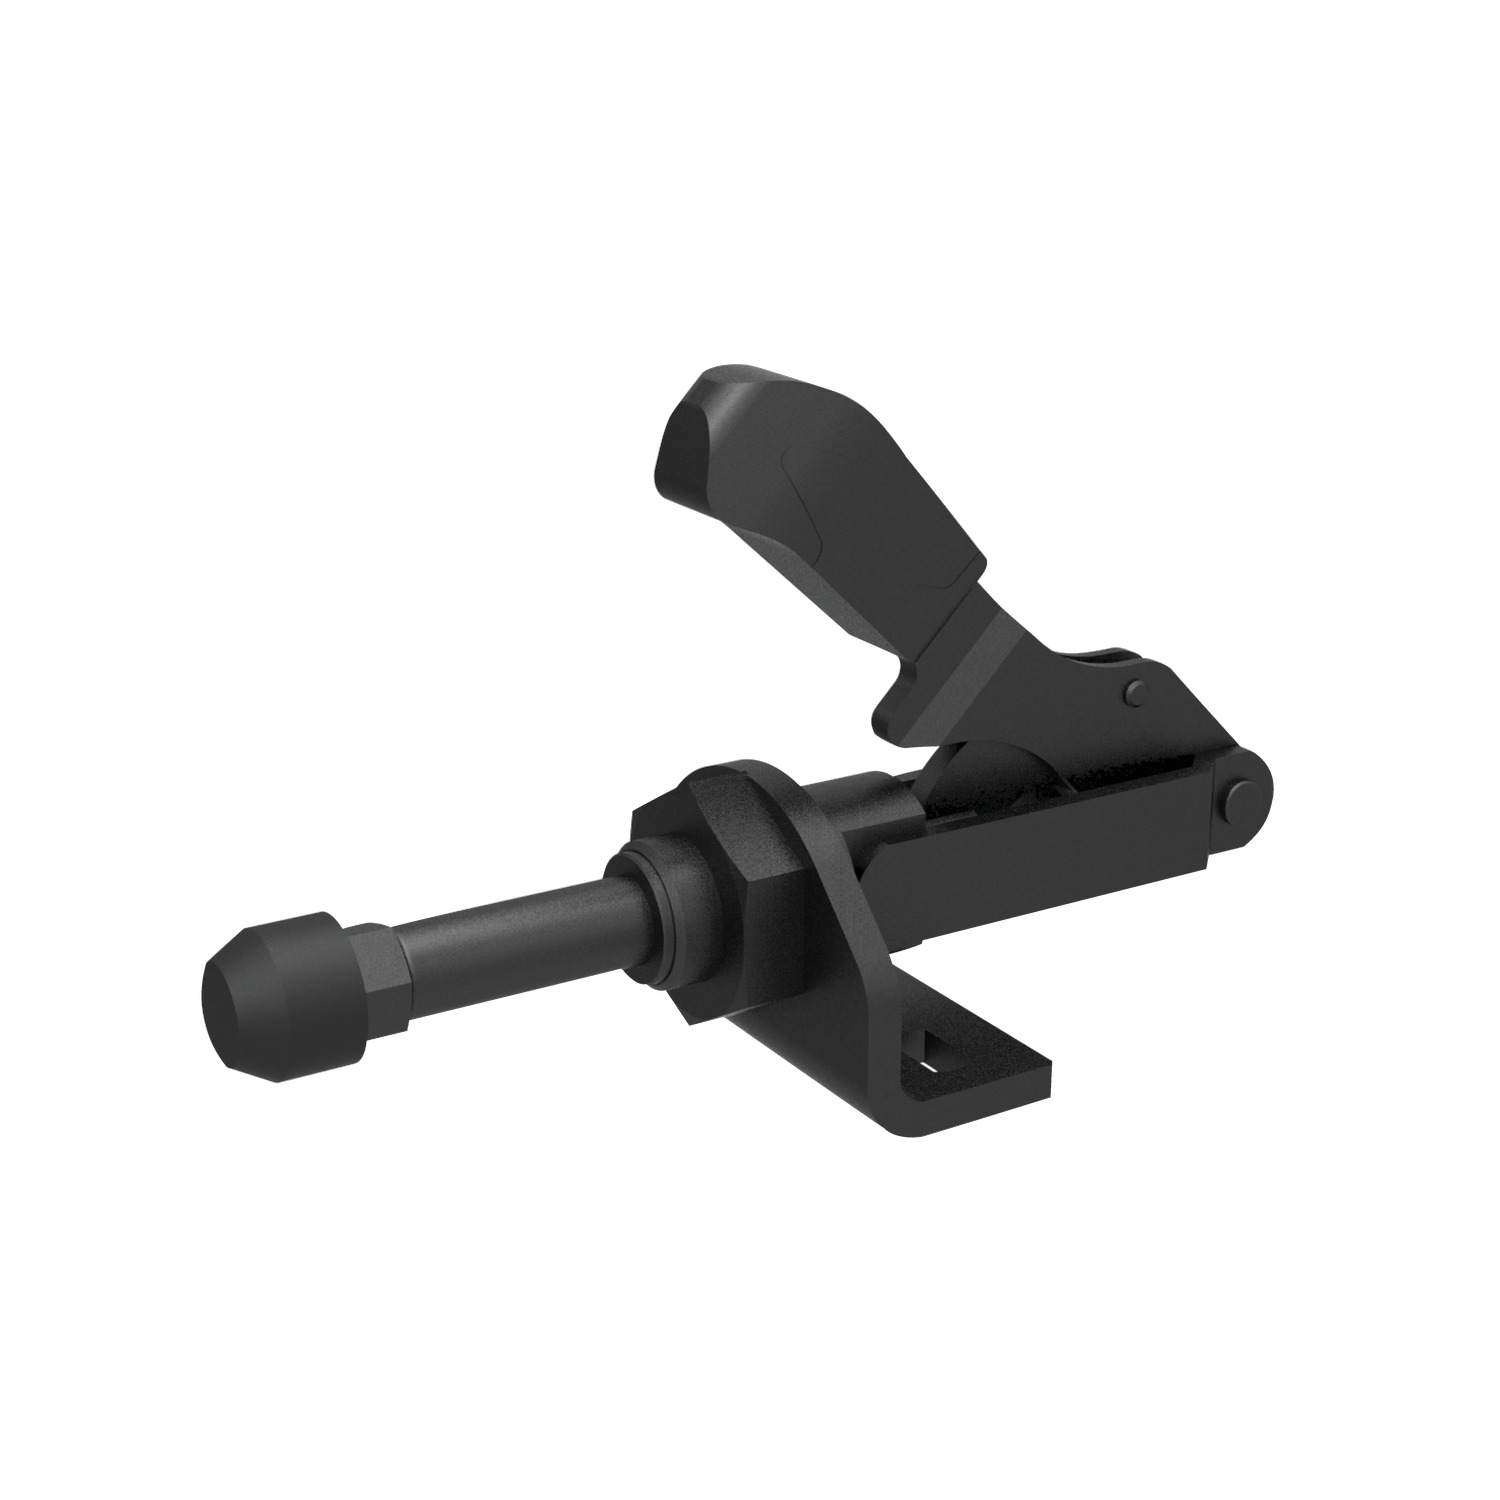 42000.2 Push-Pull Type Toggle Clamps - Black